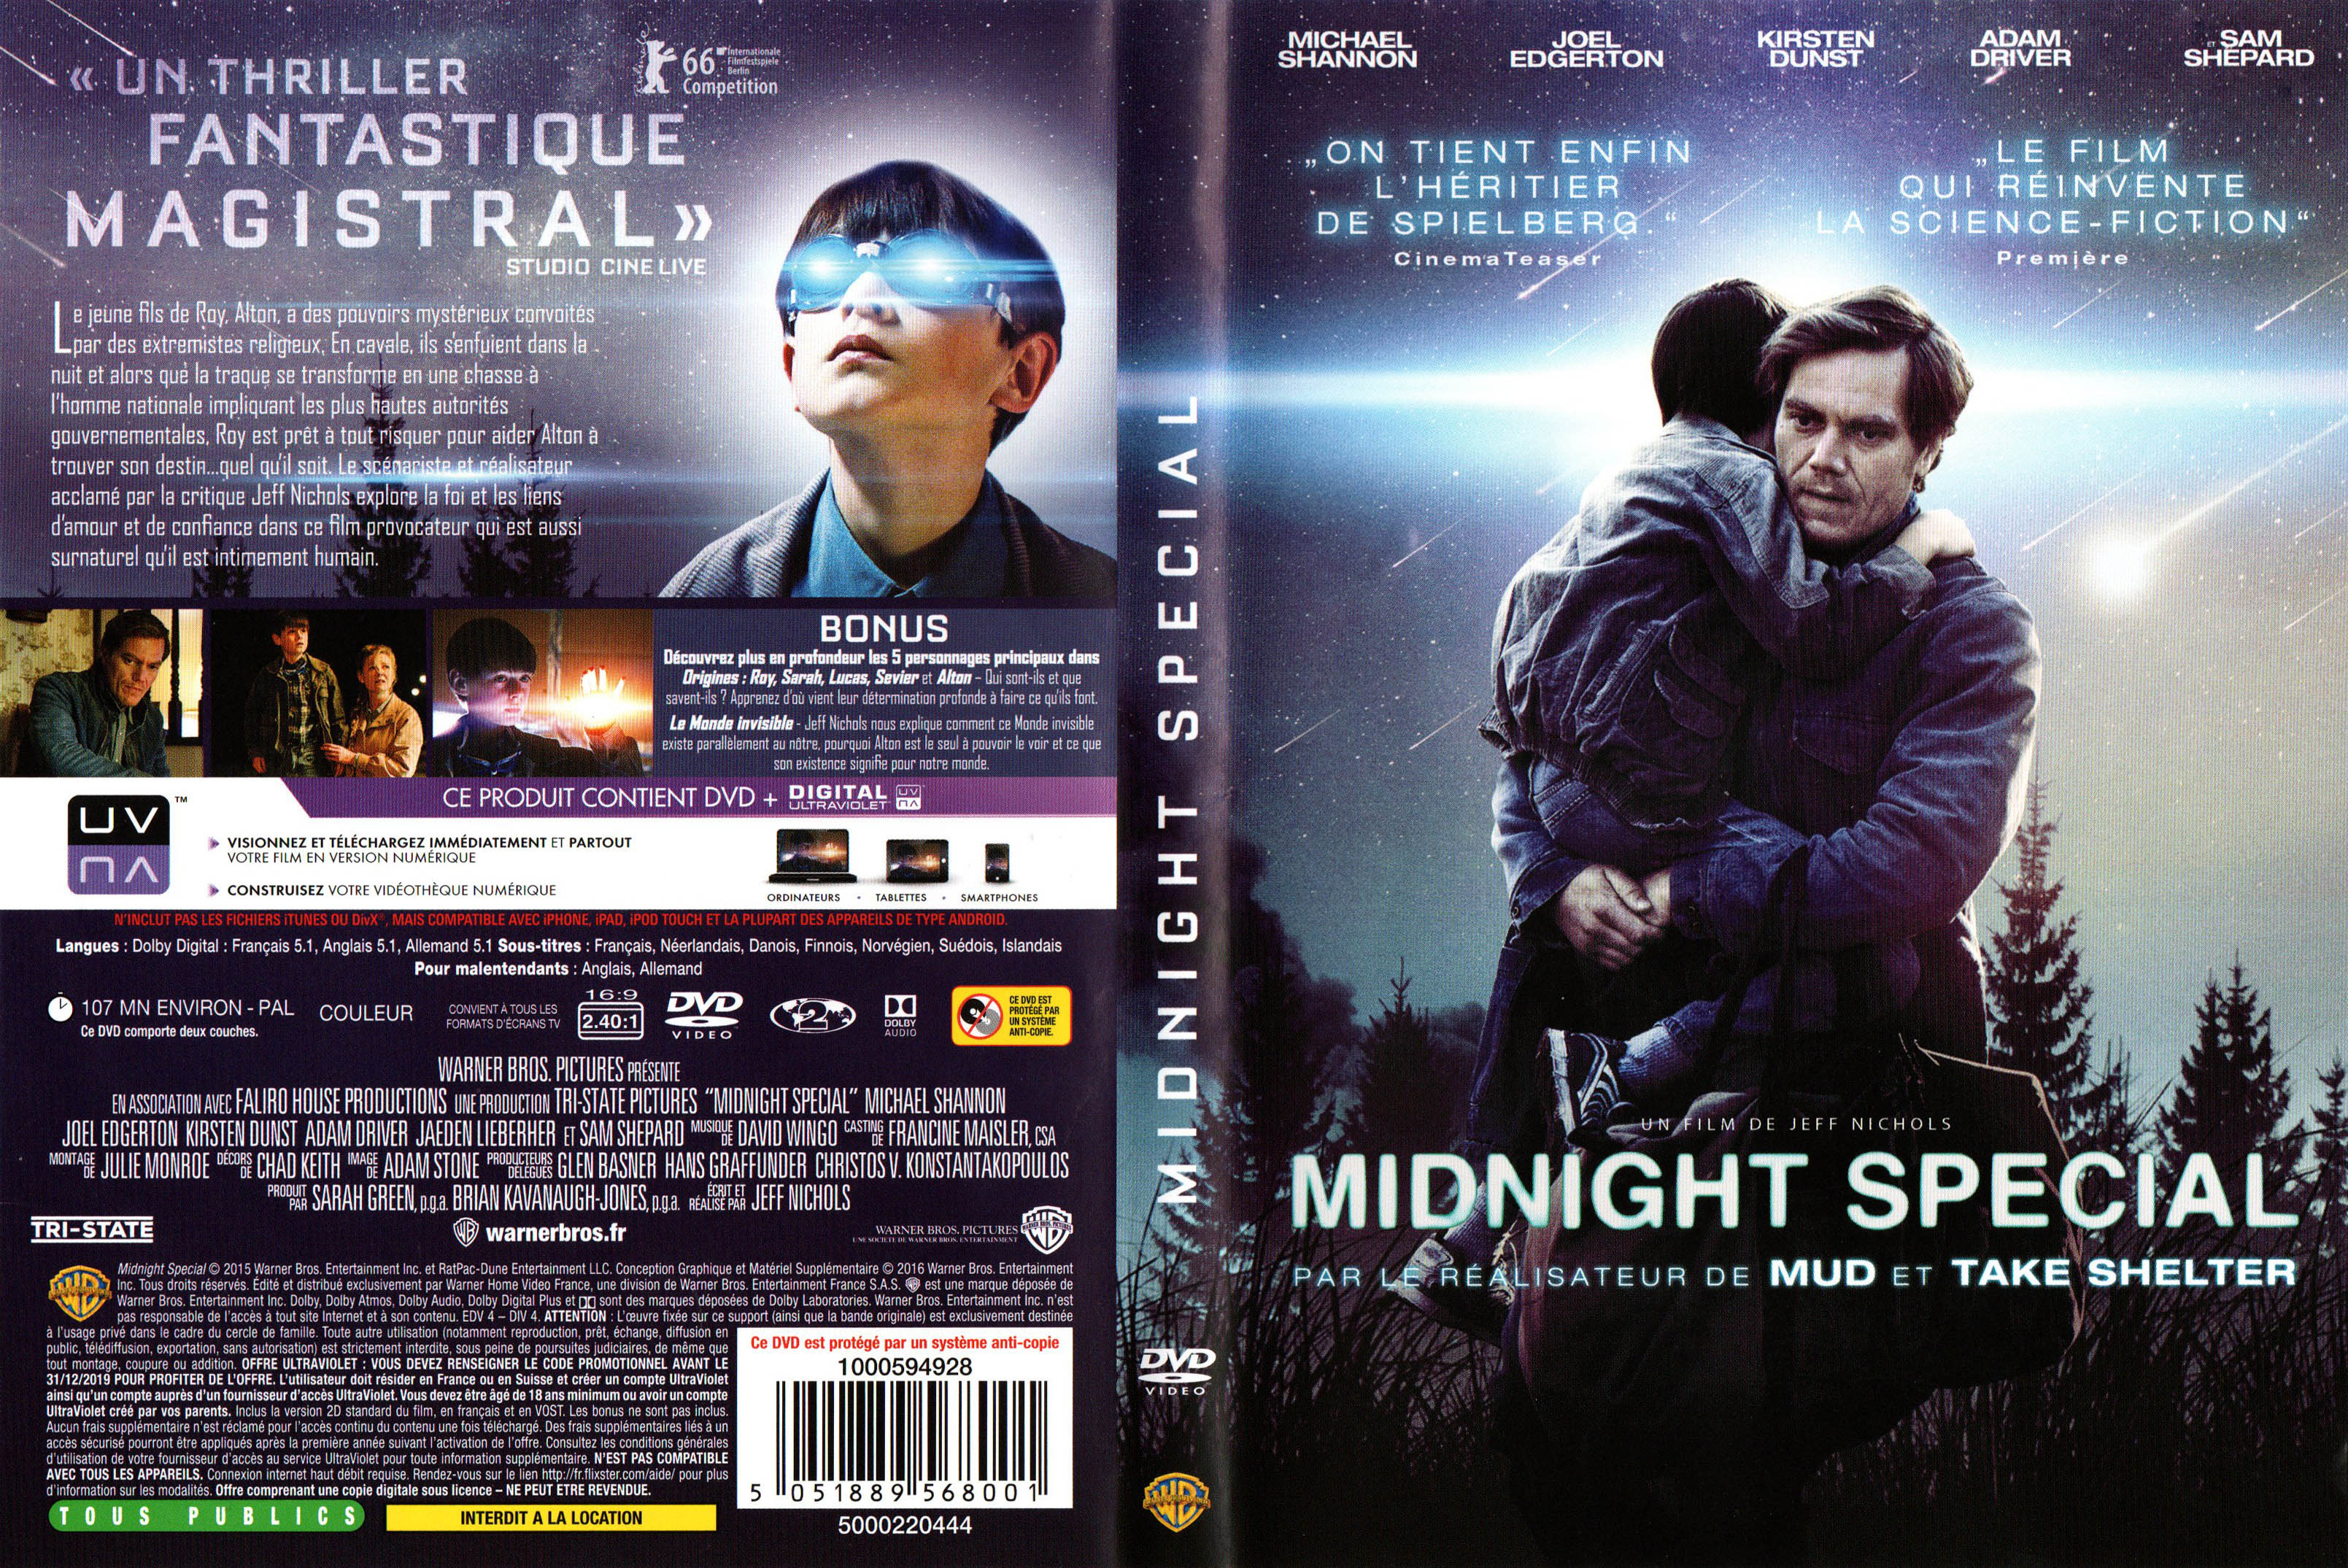 Jaquette DVD Midnight special